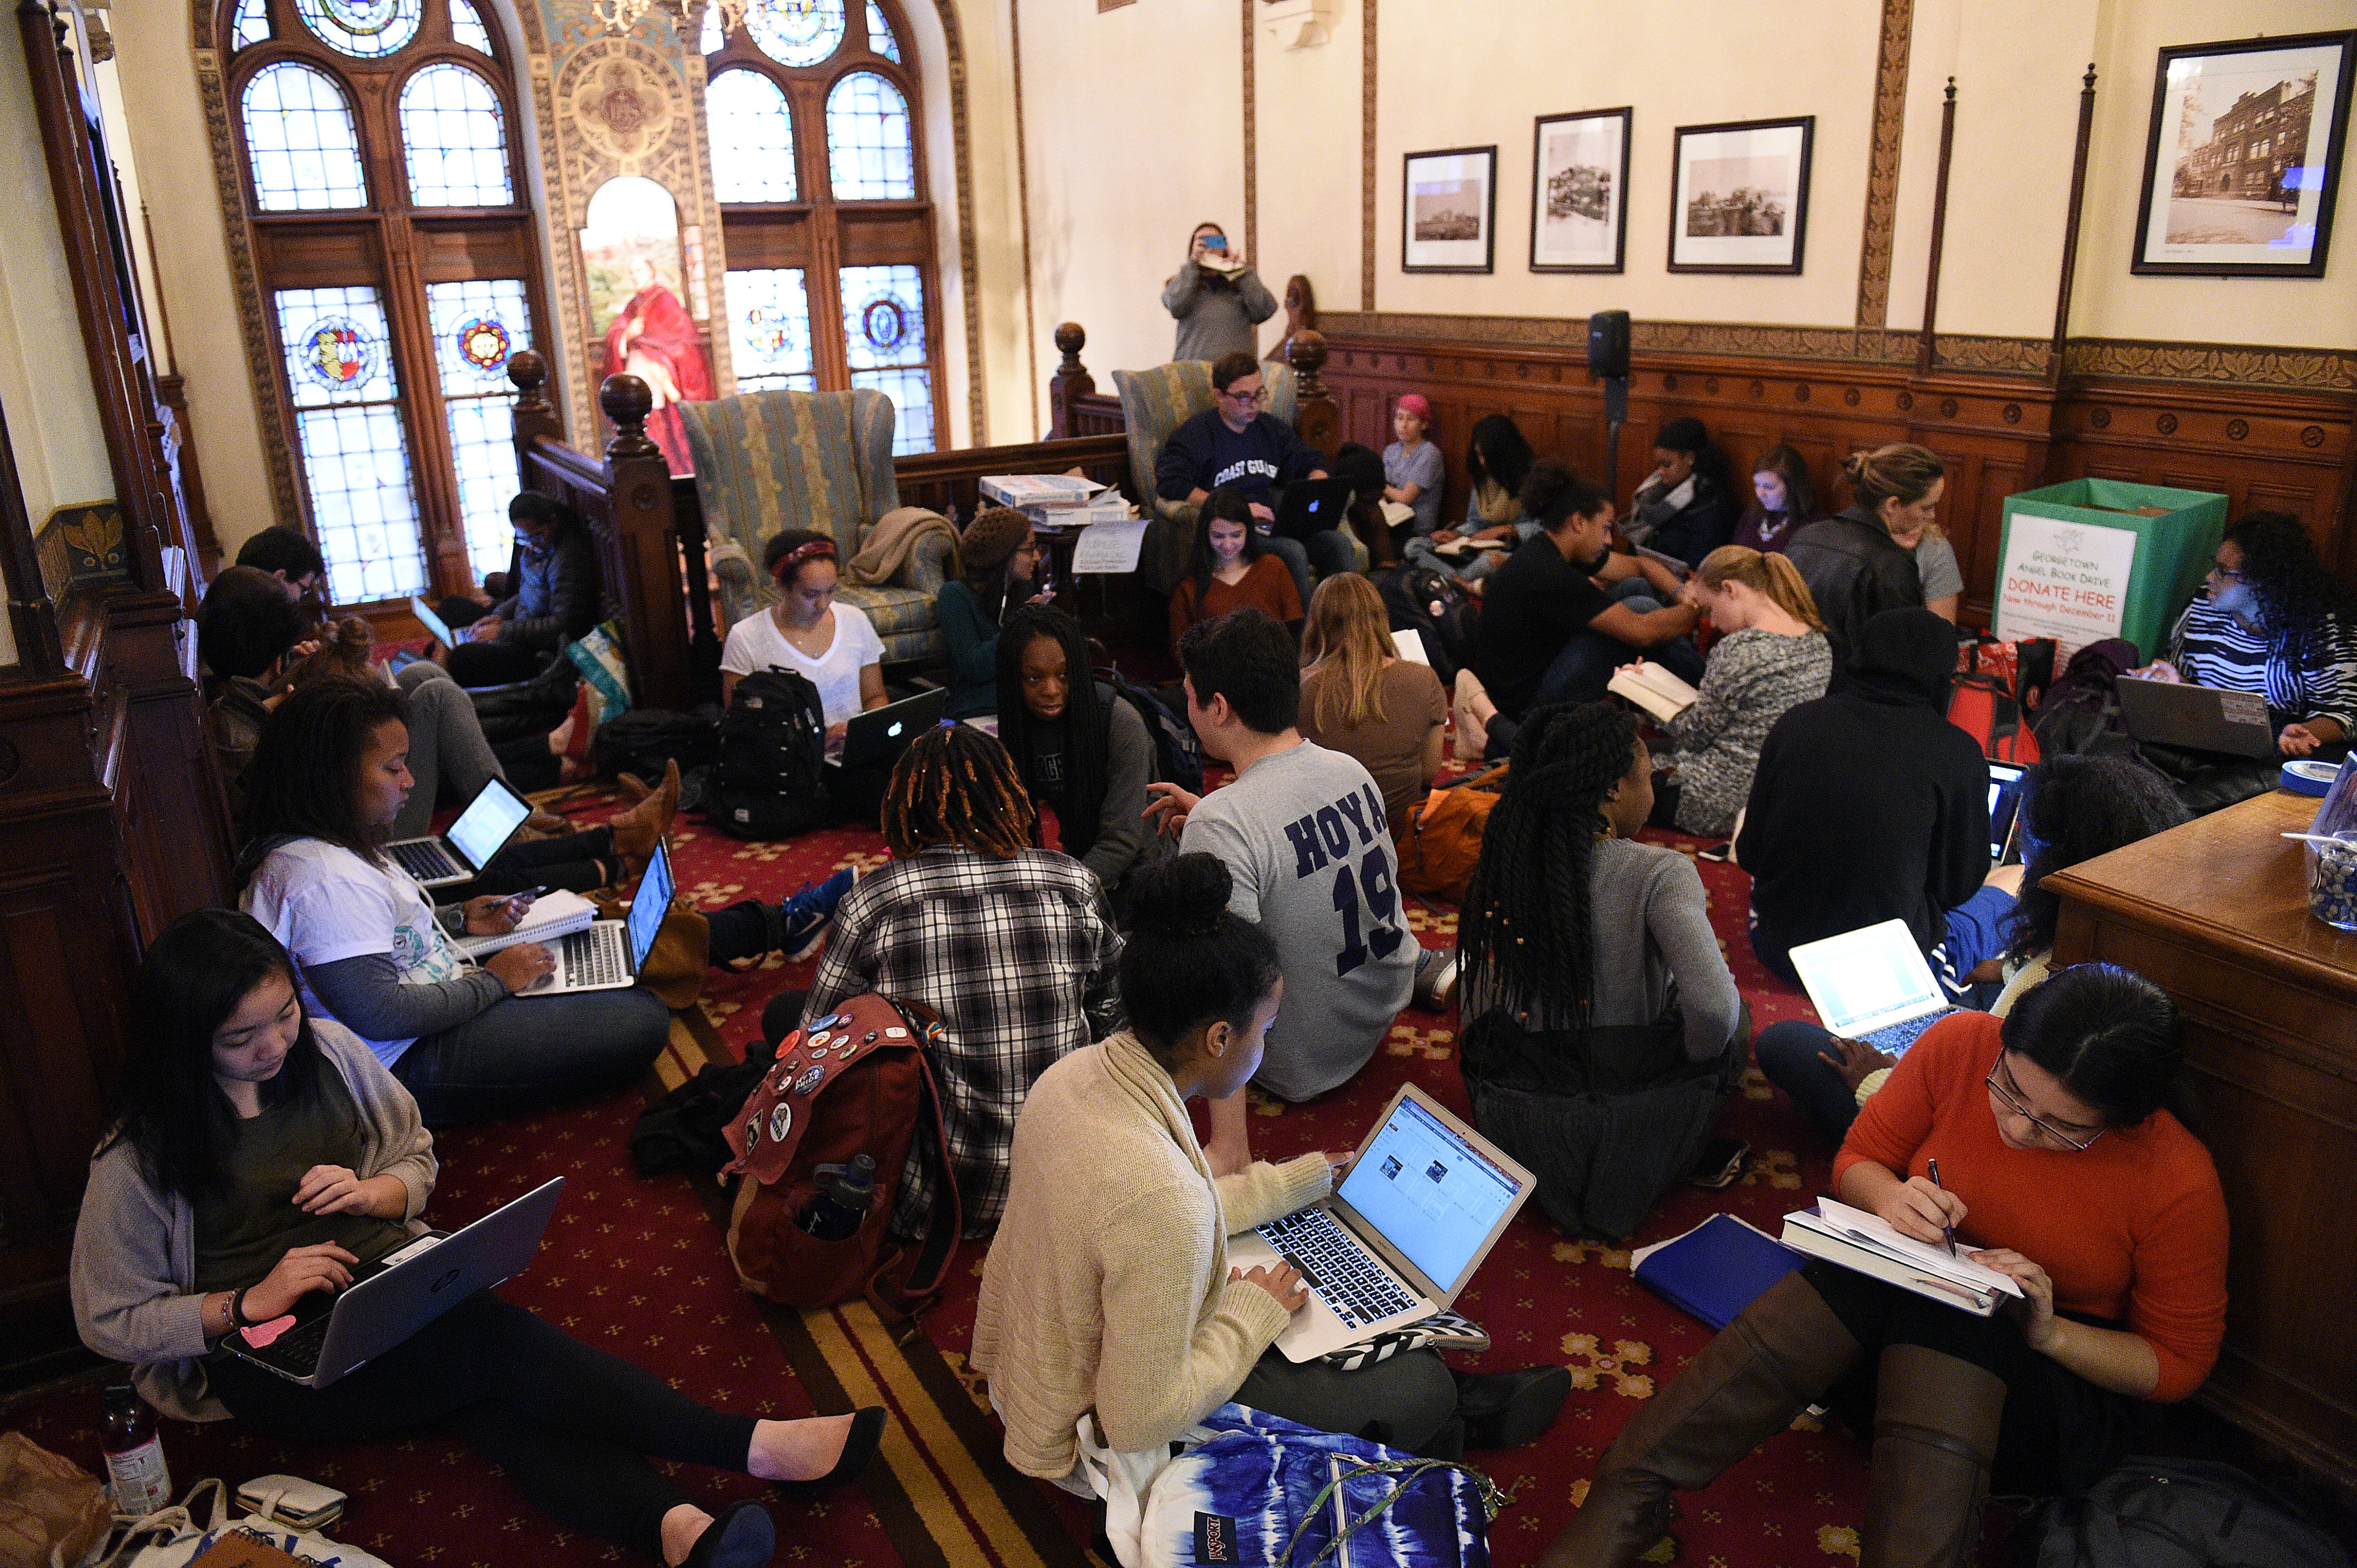 Around 30 students sit in in front of the office of John J. DeGioia, president of Georgetown University in Washington, D.C., on November 13, 2015. The sit in was in solidarity with other student protests throughout the country addressing racial discrimination on campus. The students also demanded the change of the name of Mulledy Hall on campus. The hall was named after former University President Fr. Thomas F. Mulledy, S.J., who completed his term as president in of Georgetown University in 1838. After his term, Mulledy authorized the sale of 272 slaves owned by the Society of Jesus in Maryland. (Astrid Riecken—The Washington Post/Getty Images)